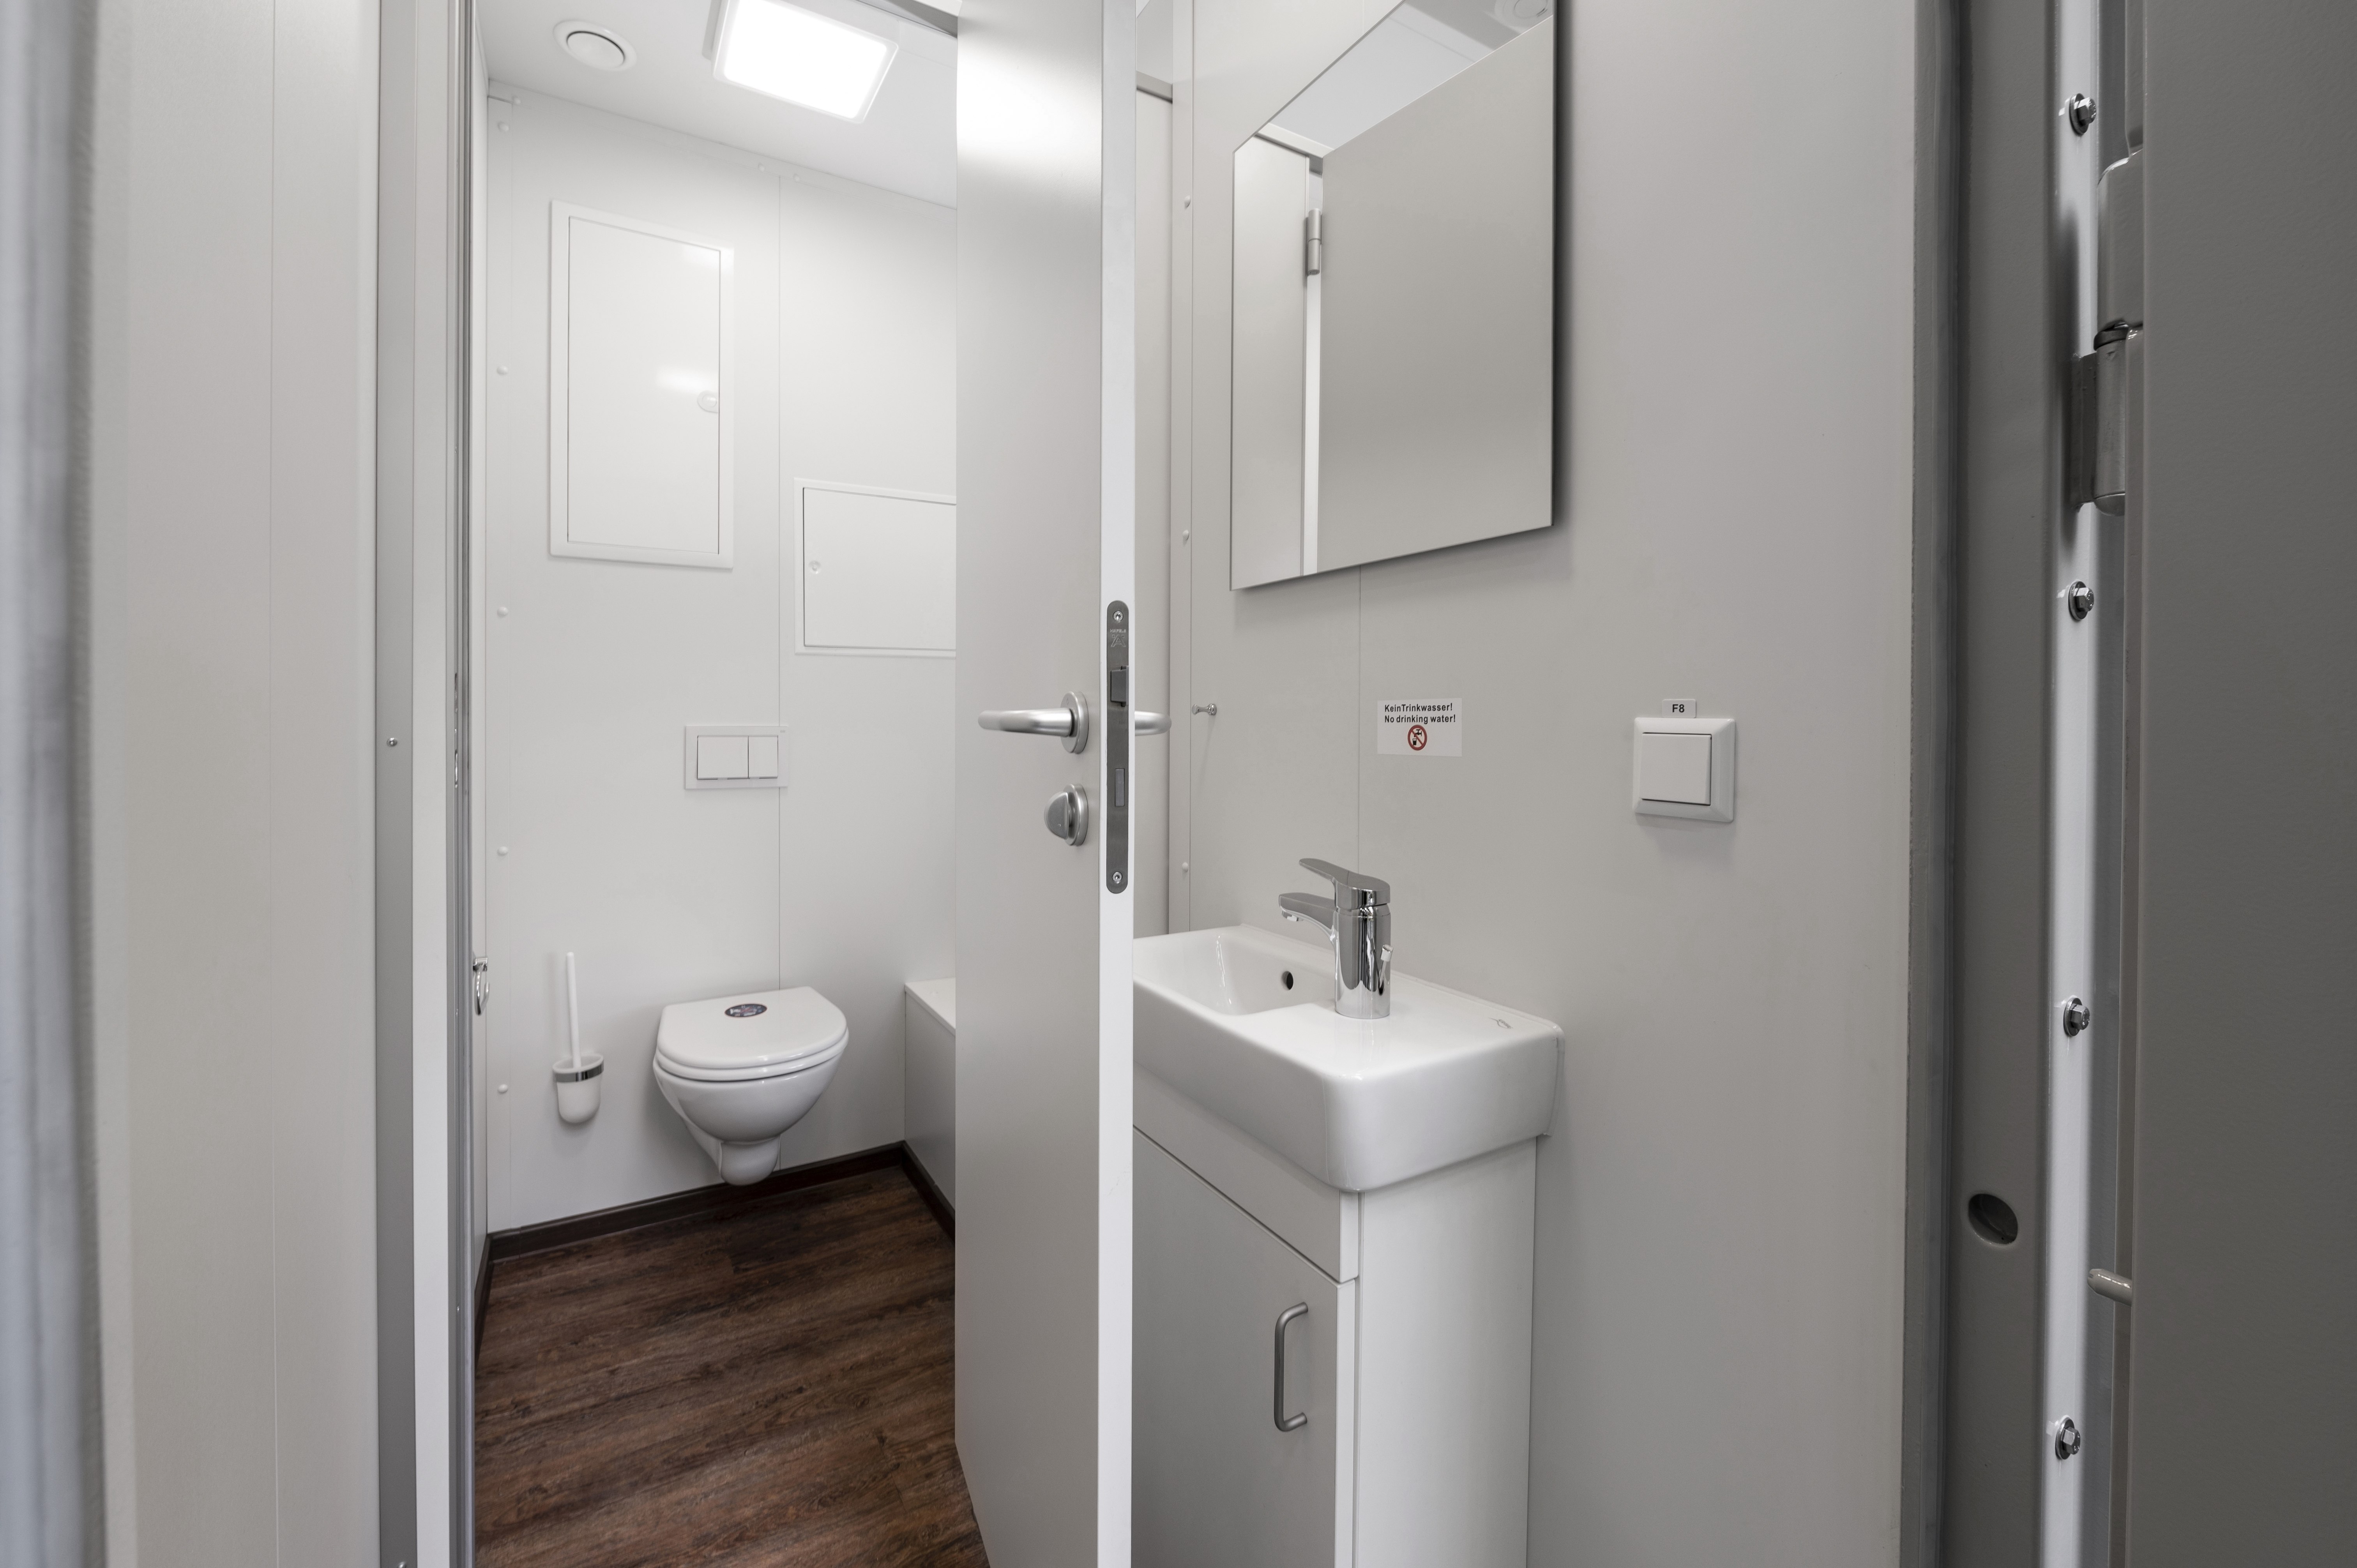 10ft specialized toilet container interior